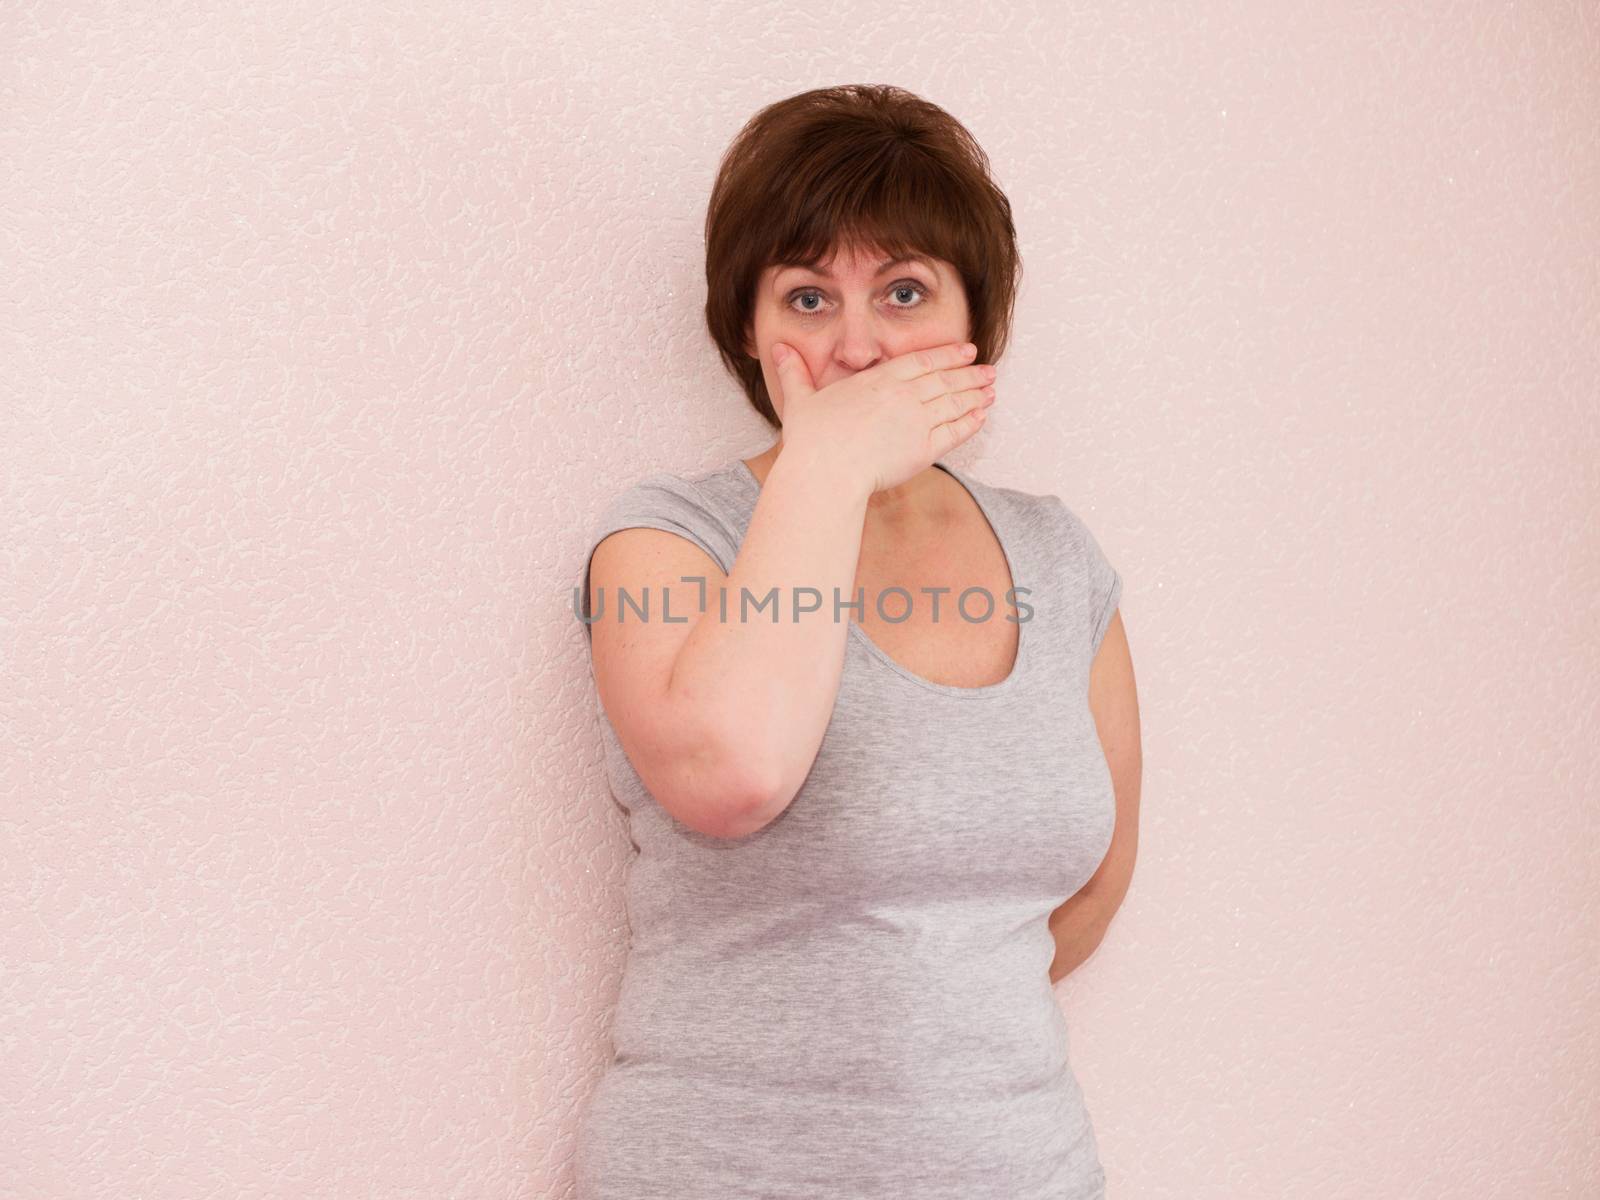 Portrait attractive mature woman with shocked, surprised, anxious facial expression, covering mouth with hand on plain background